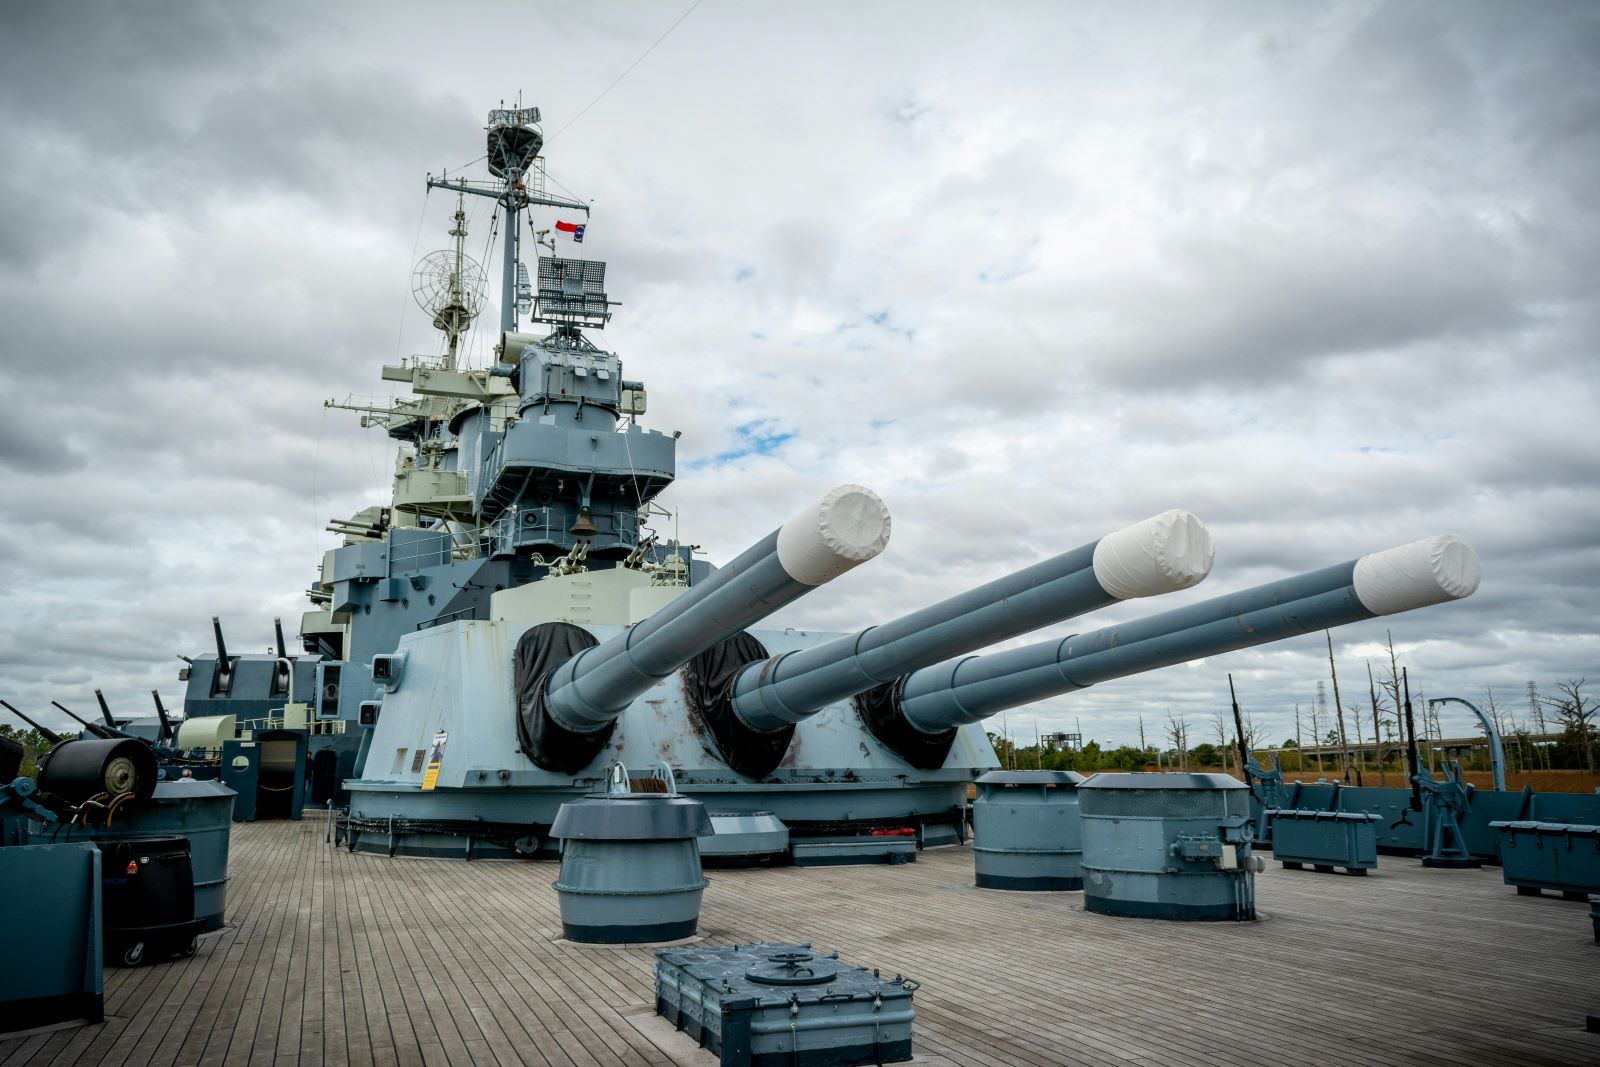 Image Credit: Pexel / Joseph Fuller <p>Tour the USS Missouri, where the Japanese surrender took place, effectively ending WWII. The ship’s decks offer historical contexts and a view back to the start of U.S. involvement in the war.</p>